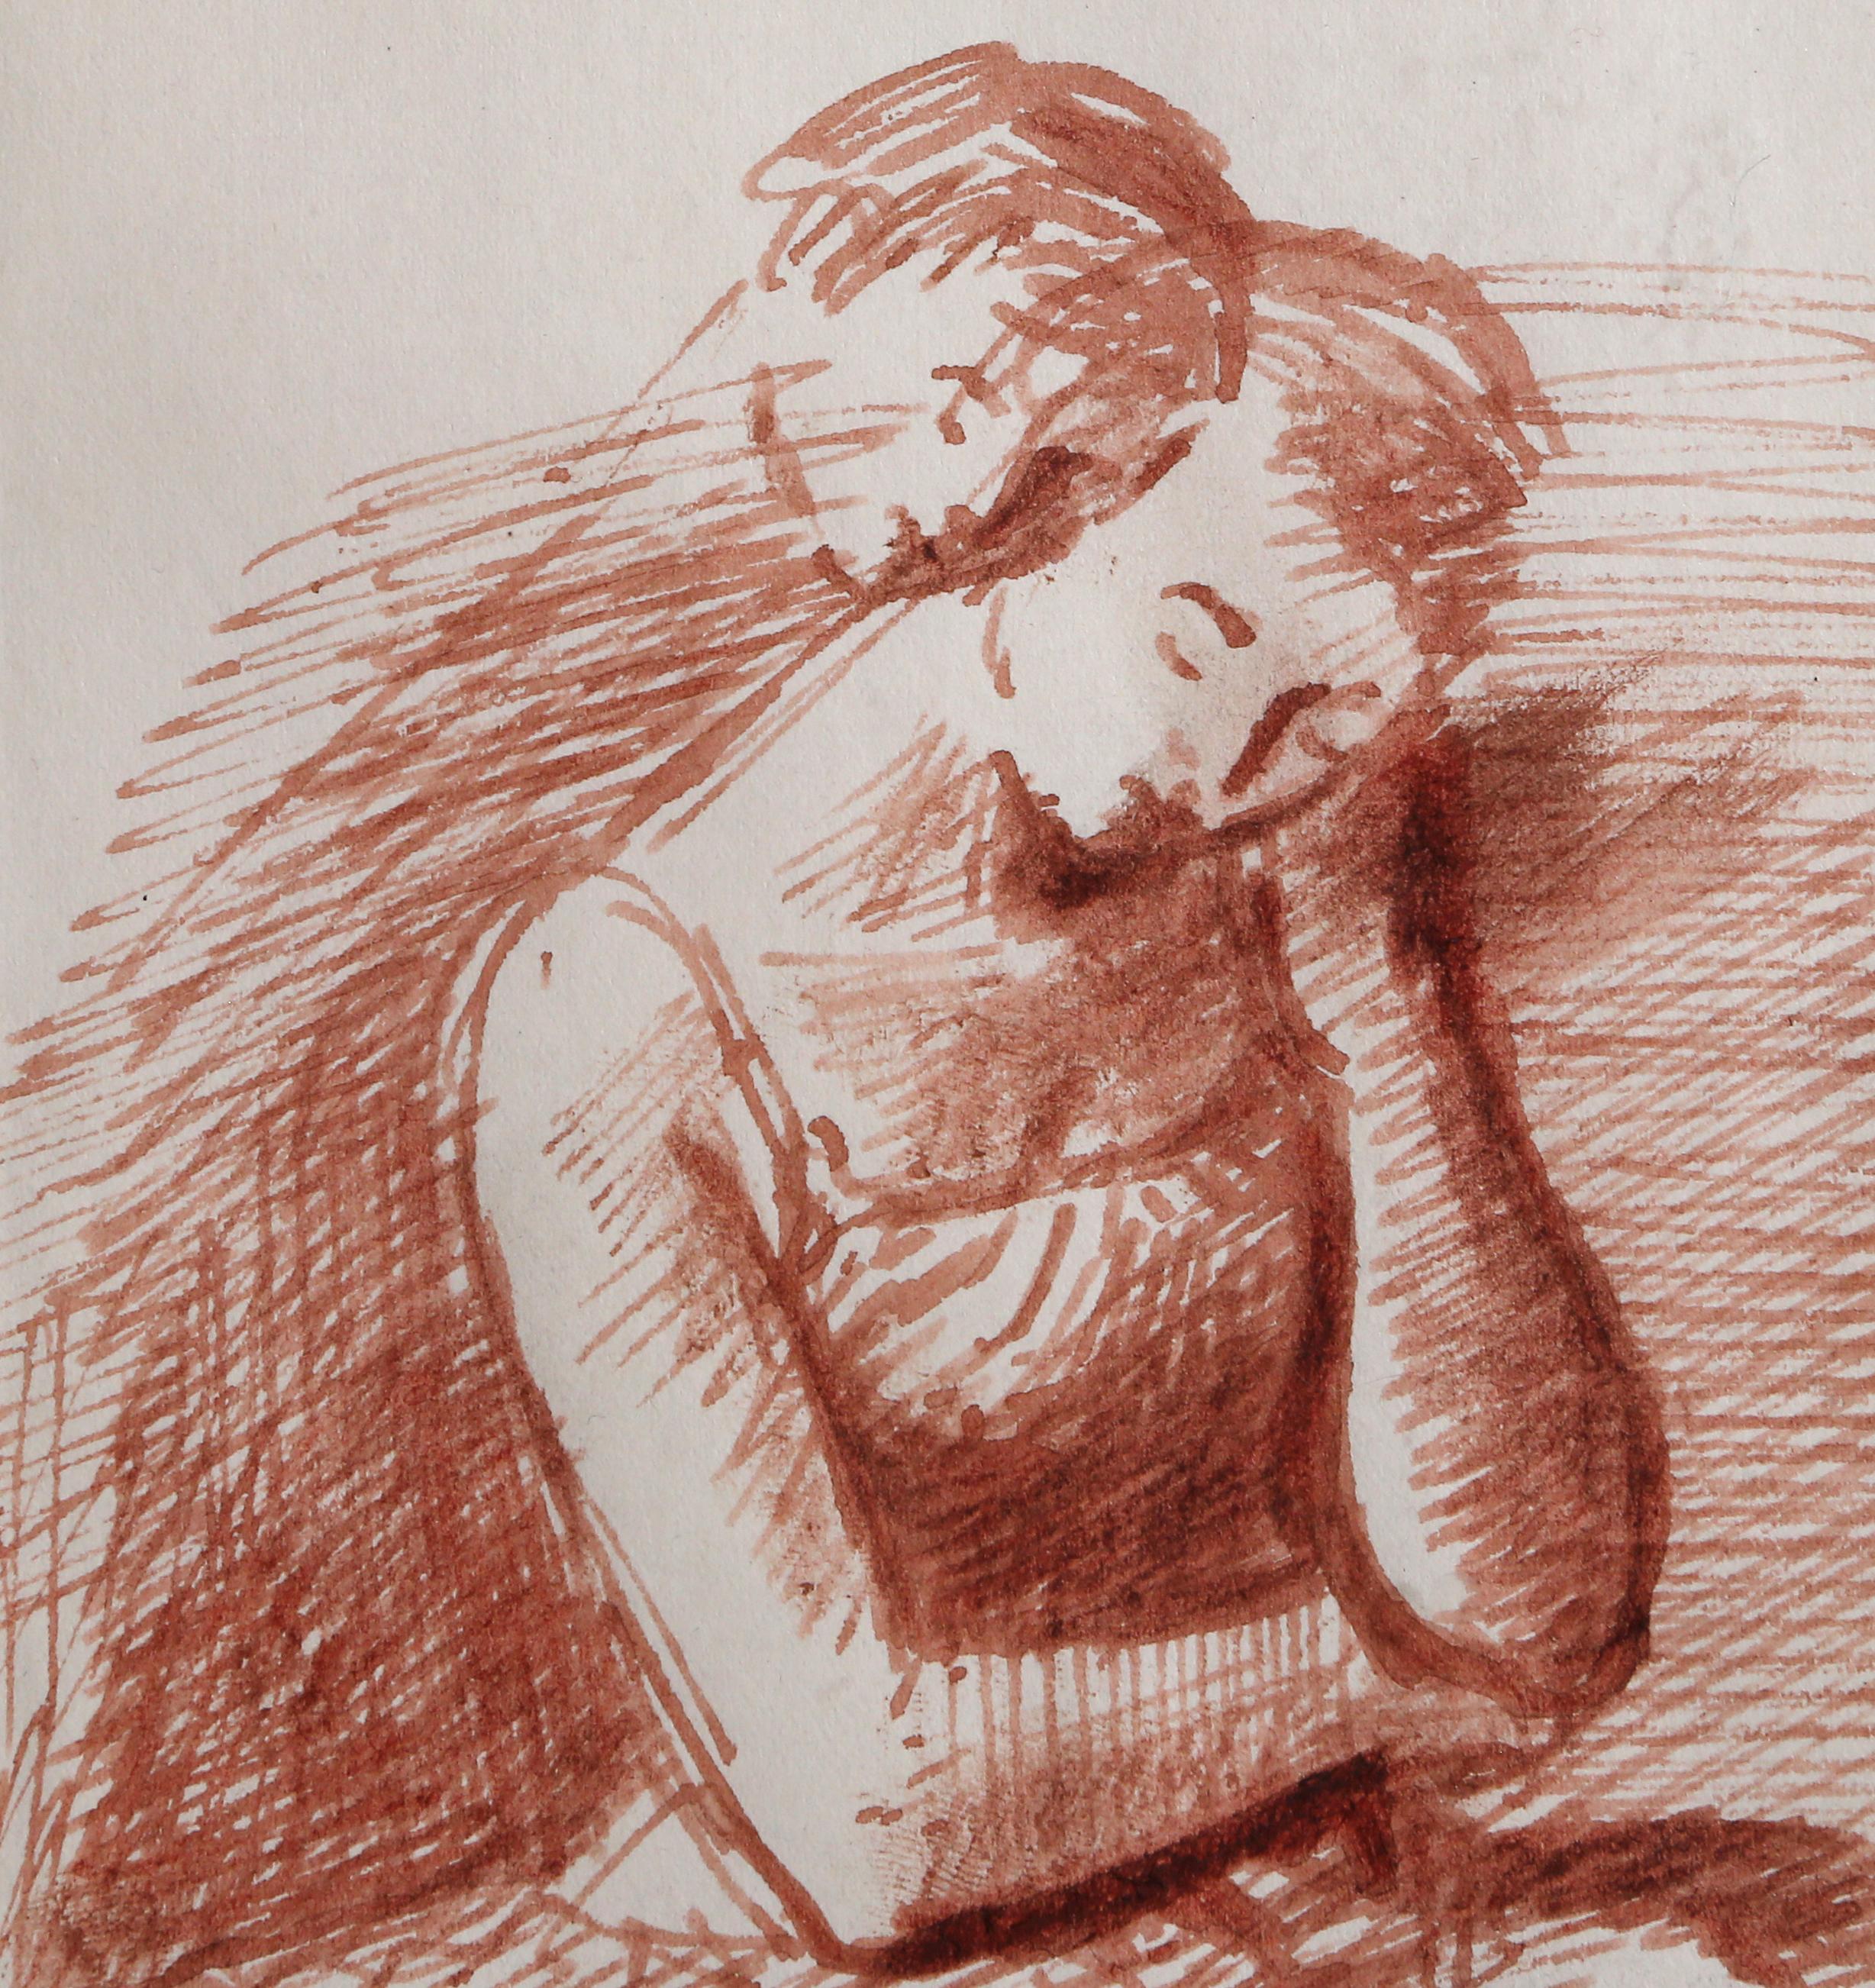 Artist: Raphael Soyer, Russian/American (1899 - 1987)
Title: Pensive Dancer
Year: circa 1956
Medium: Pencil on Paper, signed lower right
Paper Size: 8 x 5 inches 
Frame: 11.5 x 9.5 inches